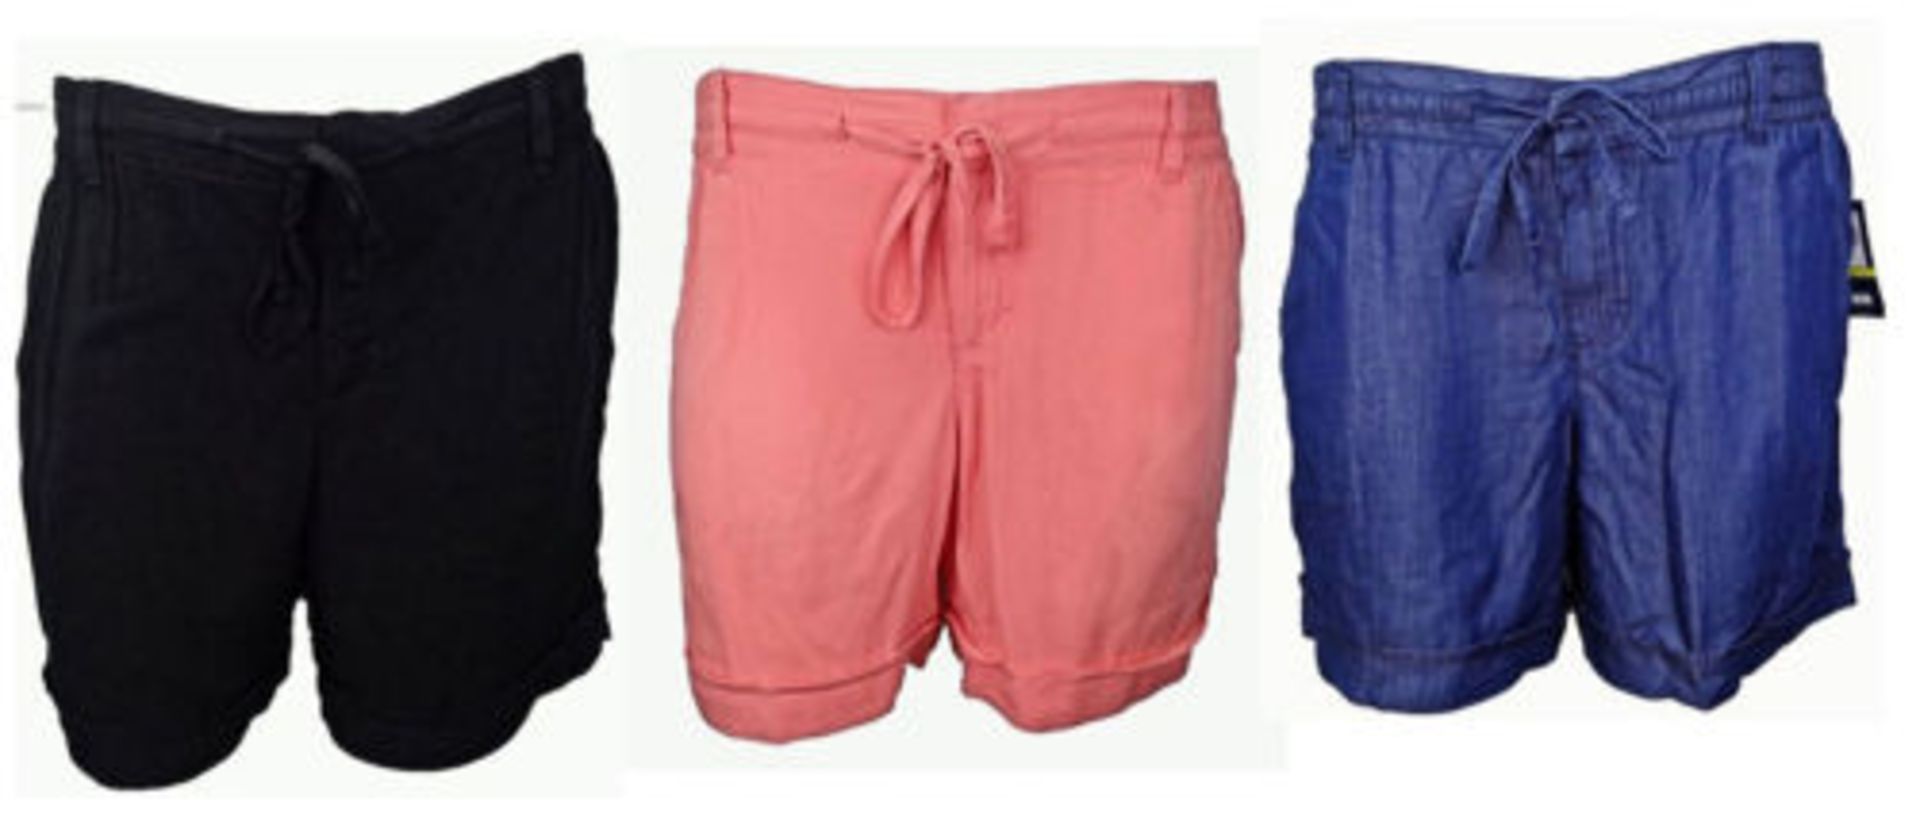 50 x Brand New Ladies Bandolino Jeans Molly Style Shorts. Elasticated waist with tie up ropes.